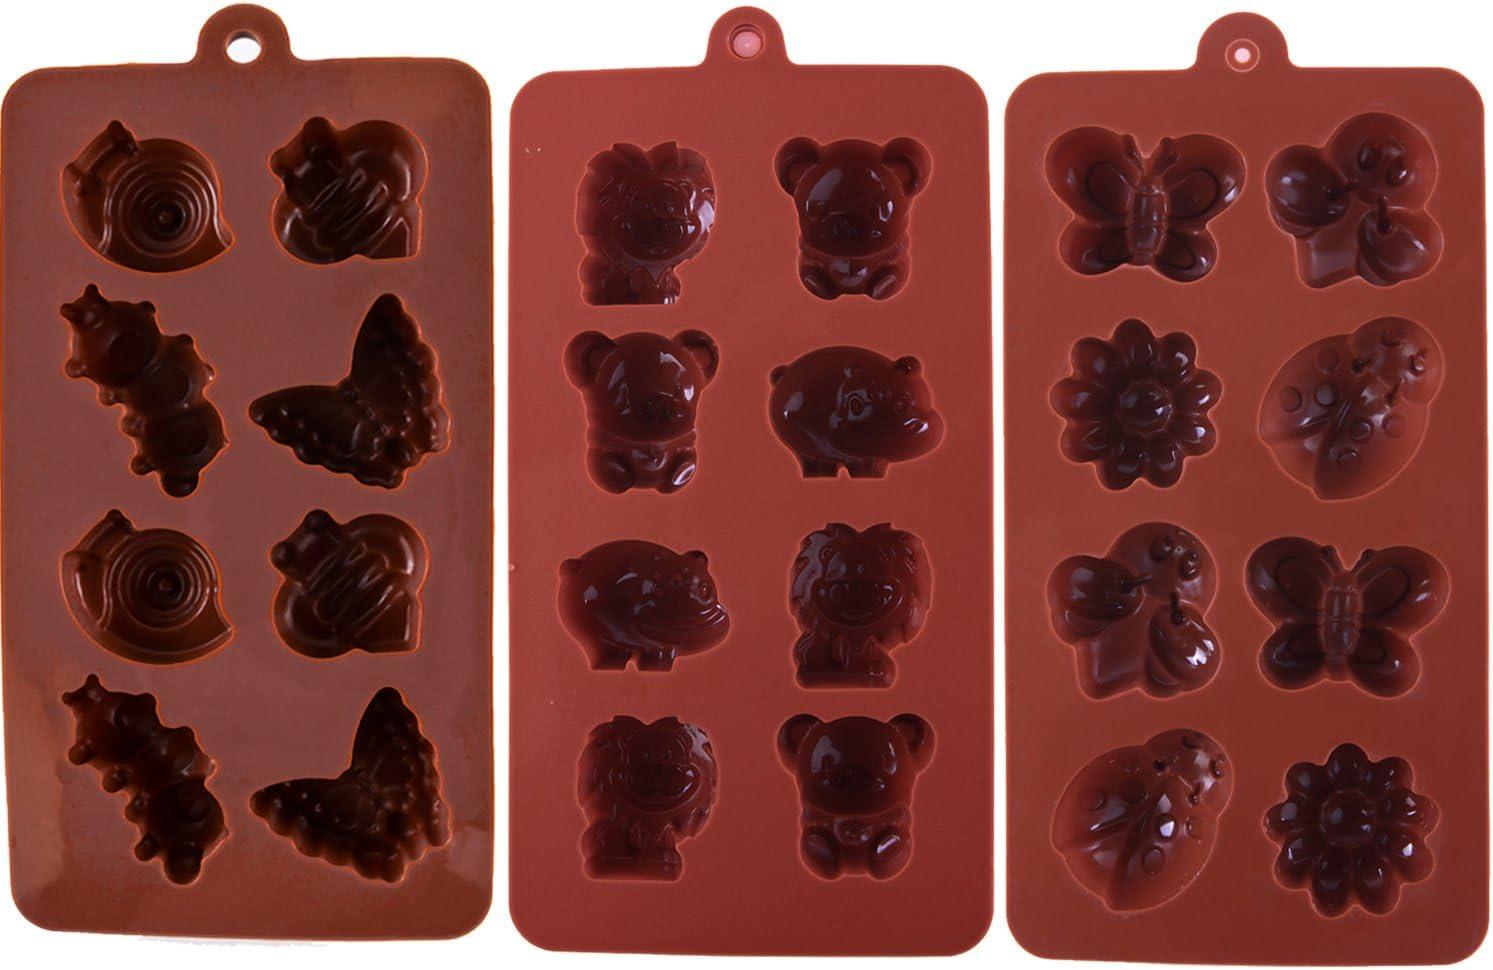 STARUBY Silicone Molds Non-stick Chocolate Candy Mold,Soap Molds,Silicone  Baking mold Making Kit, Set of 3 Forest Theme with Different Shapes  Animals,Lovely & Fun for Kids_Staruby